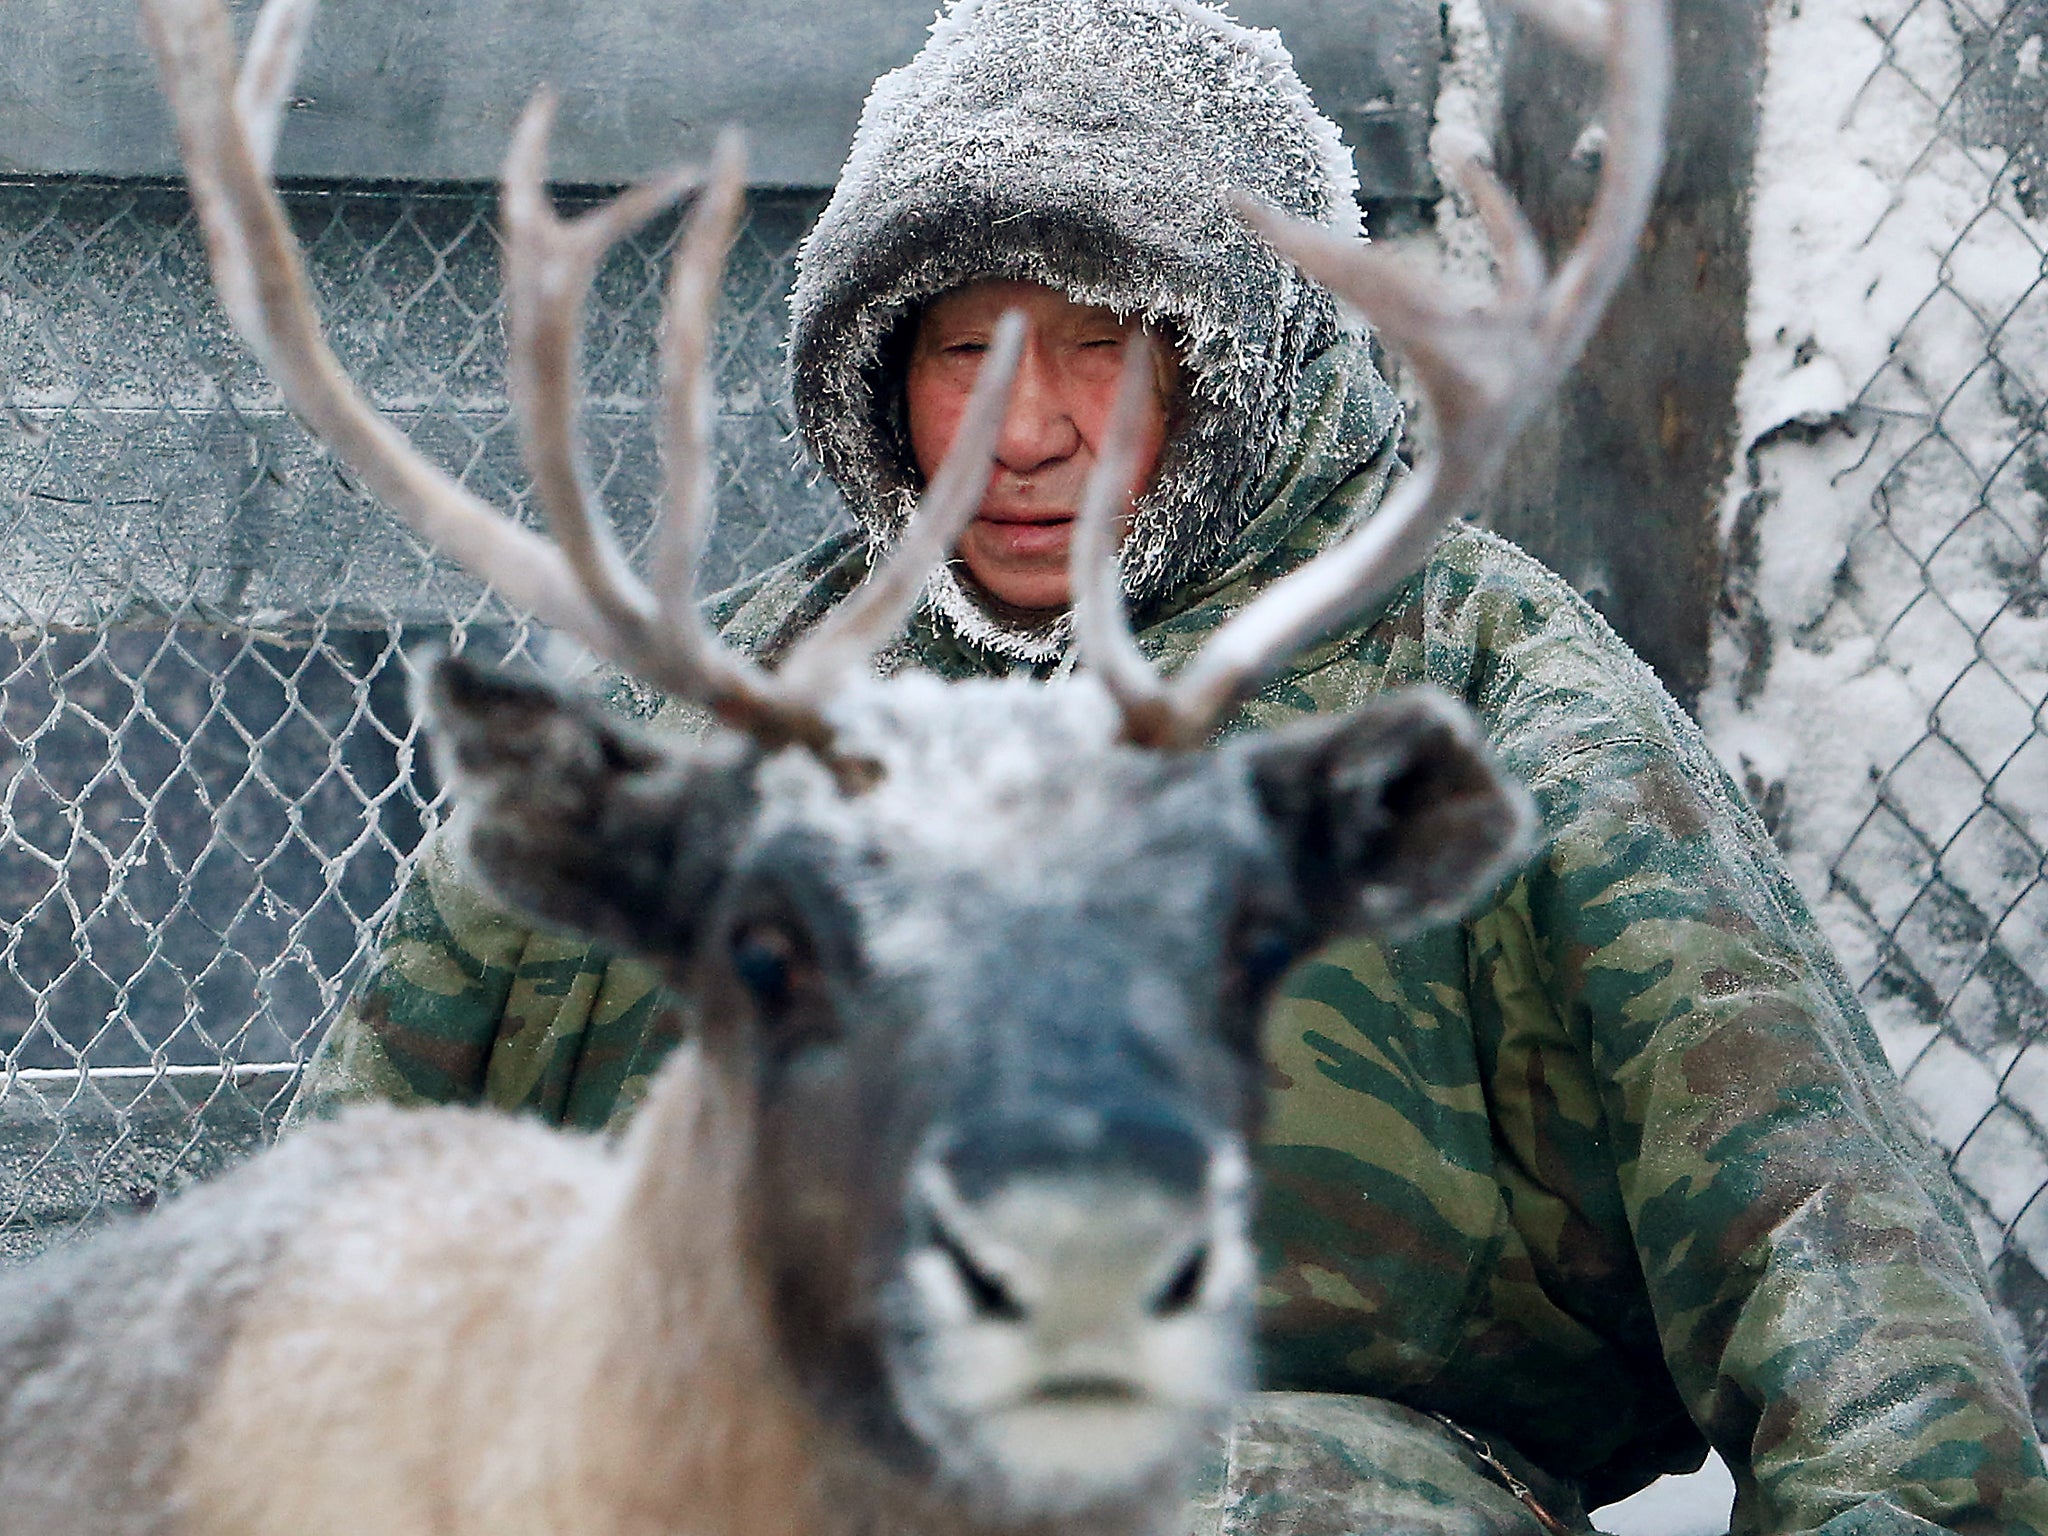 A herder sits inside the enclosure where they select and sort the animals (Reuters)